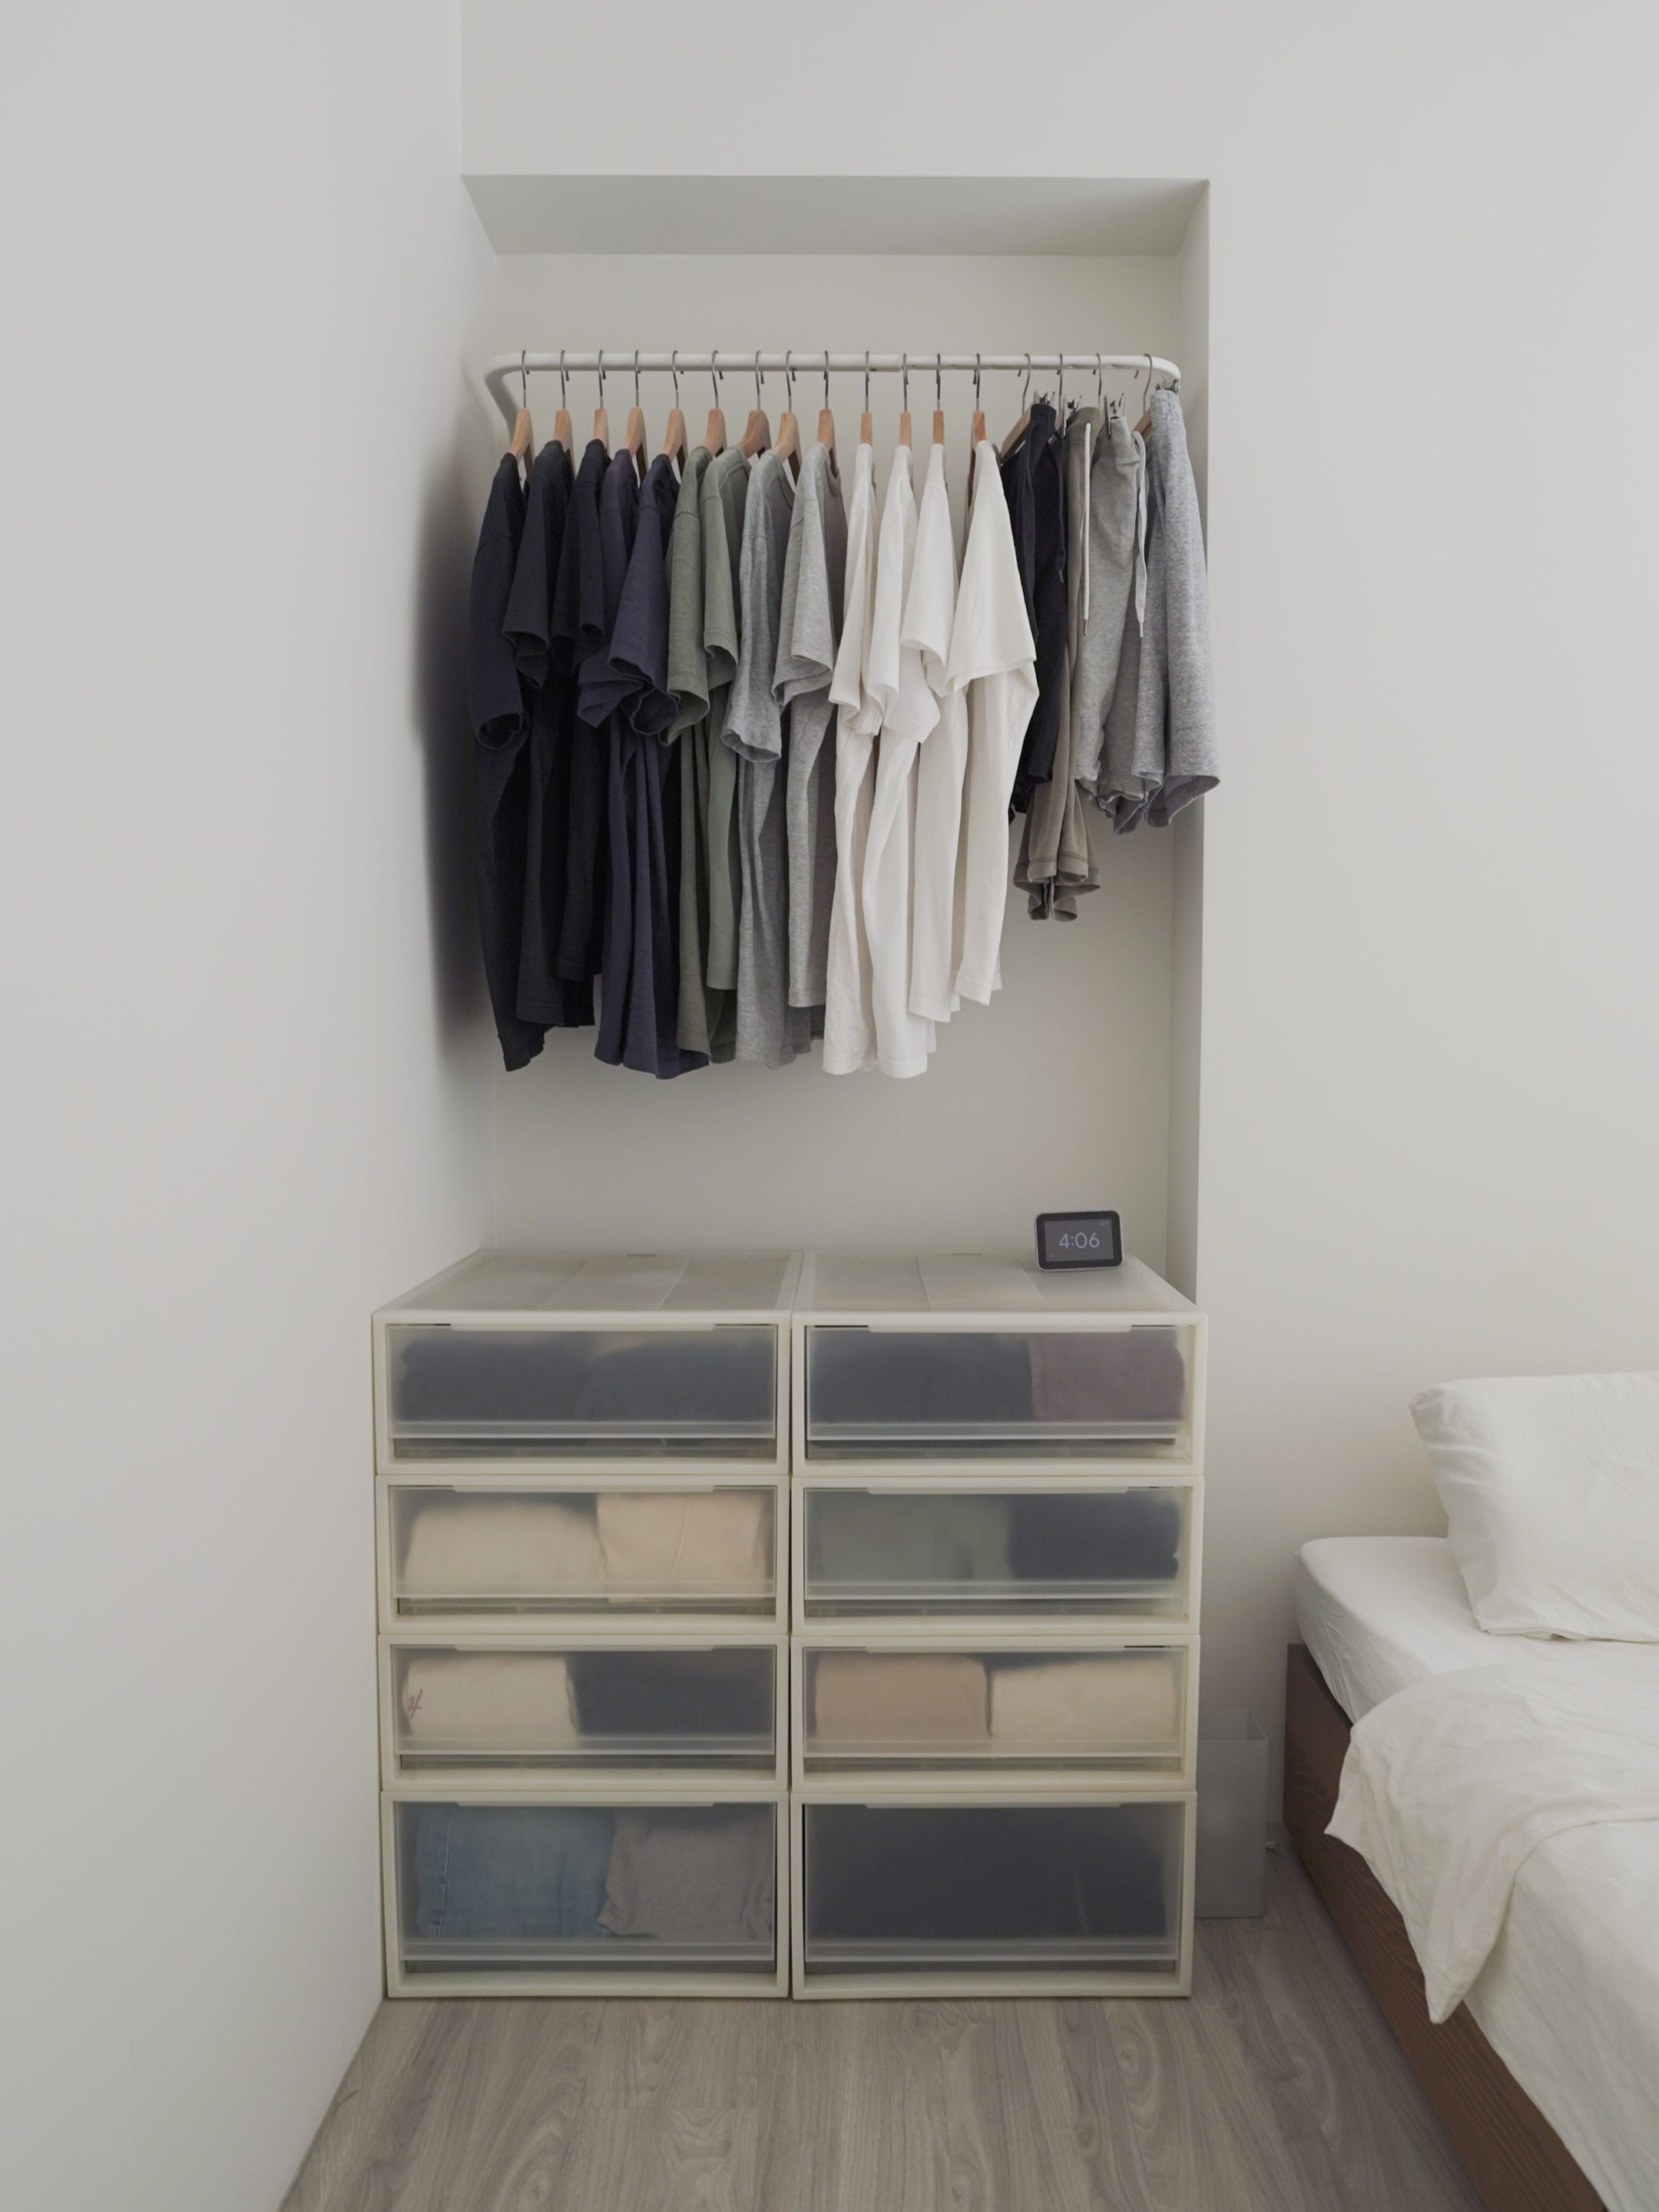 Want a Minimalist Wardrobe? Try This Clever Way of Decluttering